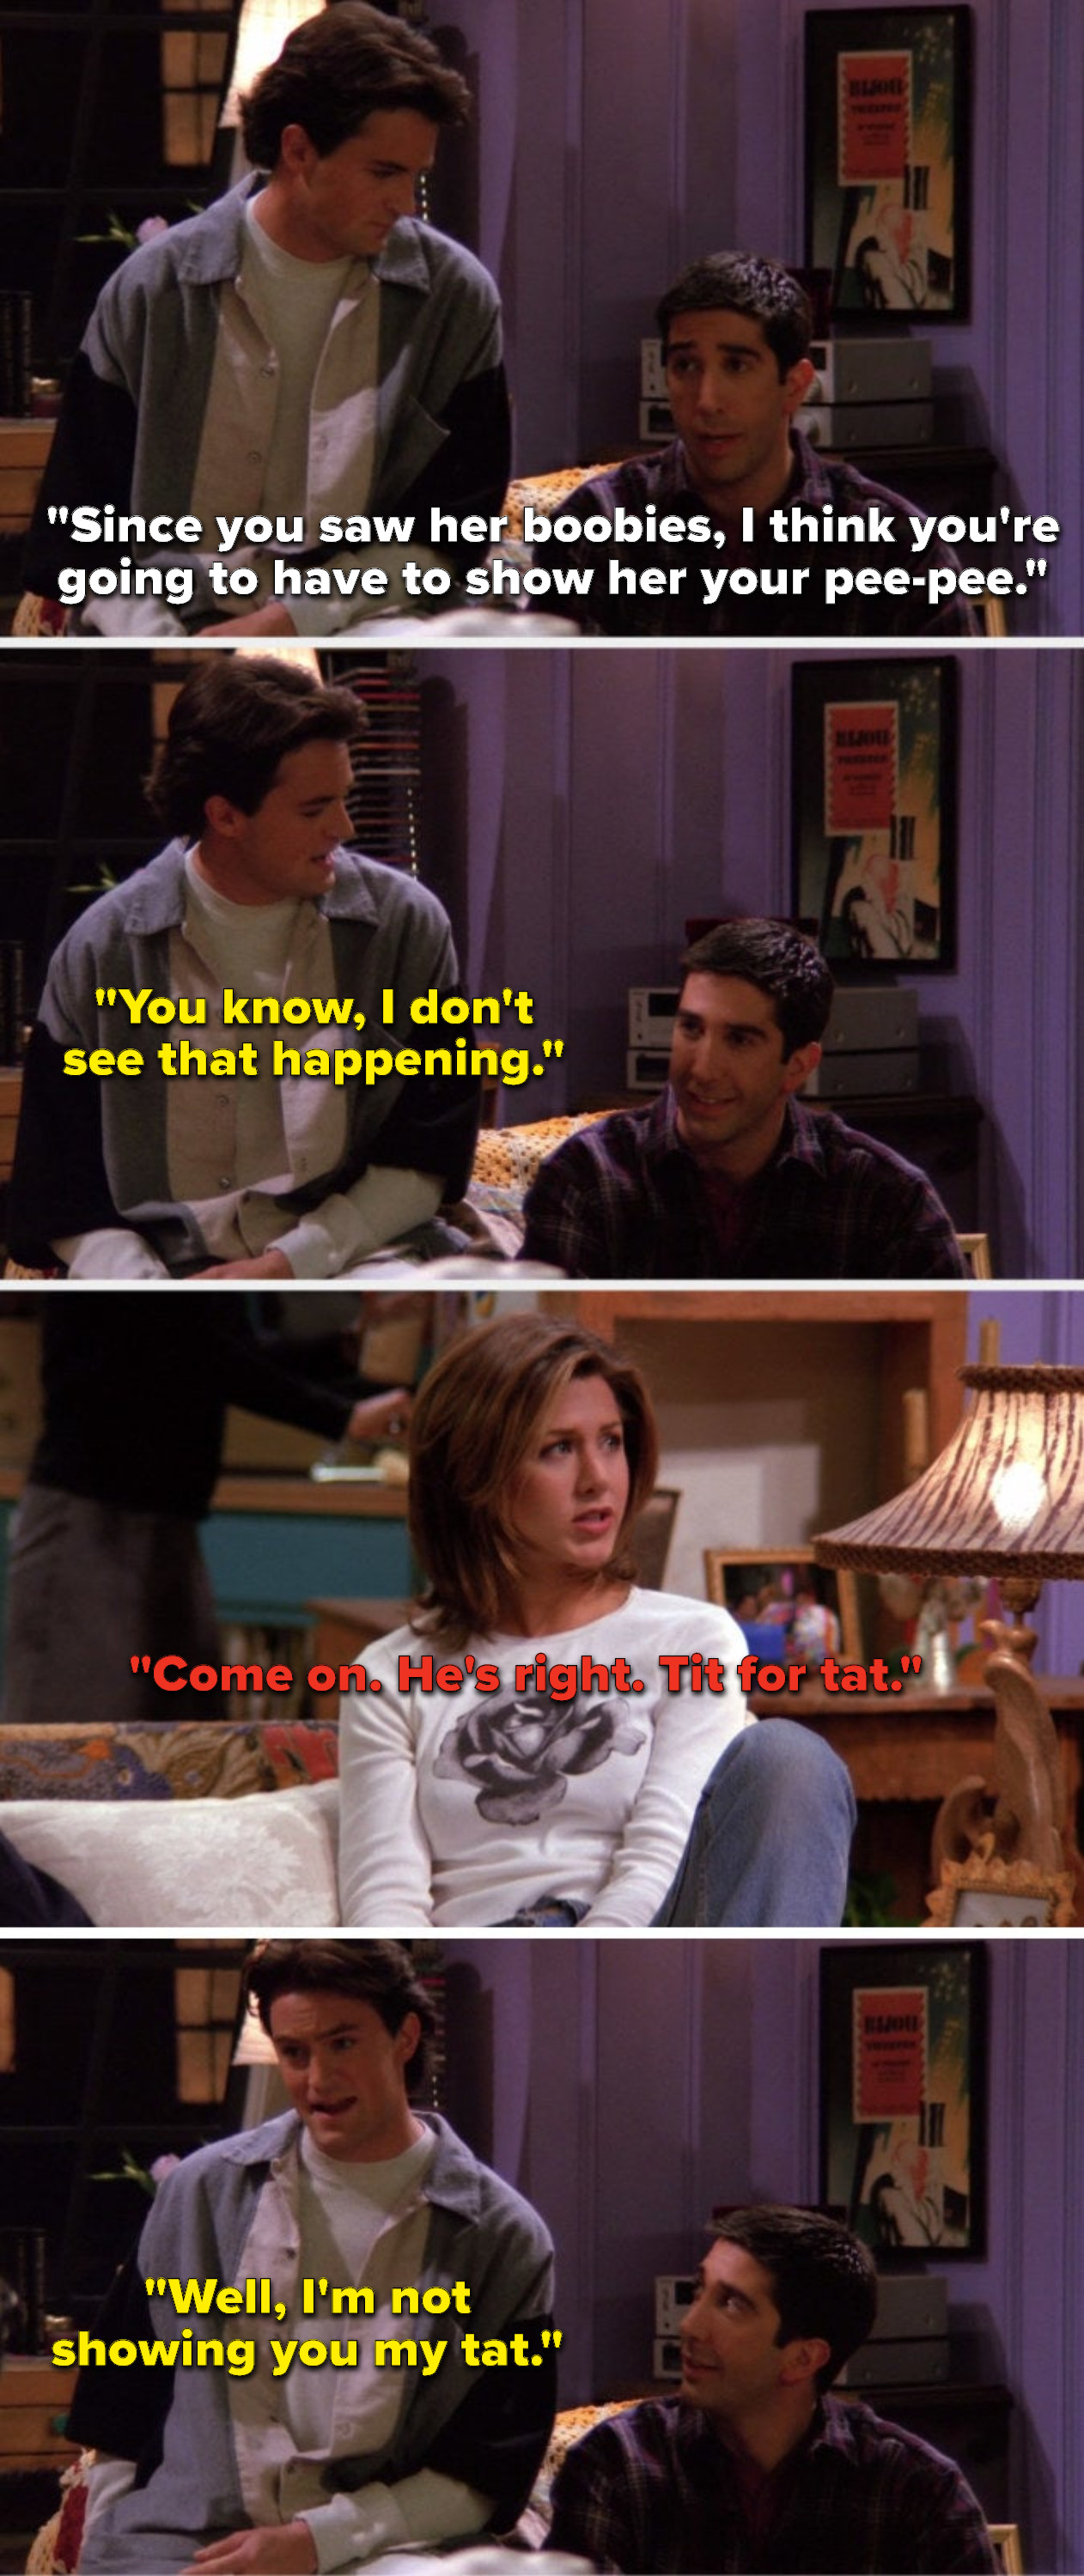 Ross says, Since you saw her boobies, I think you are going to have to show her your peepee, Chandler says, You know, I do not see that happening, Rachel says, Come on, He is right, tit for tat, and Chandler says, Well Im not showing you my tat